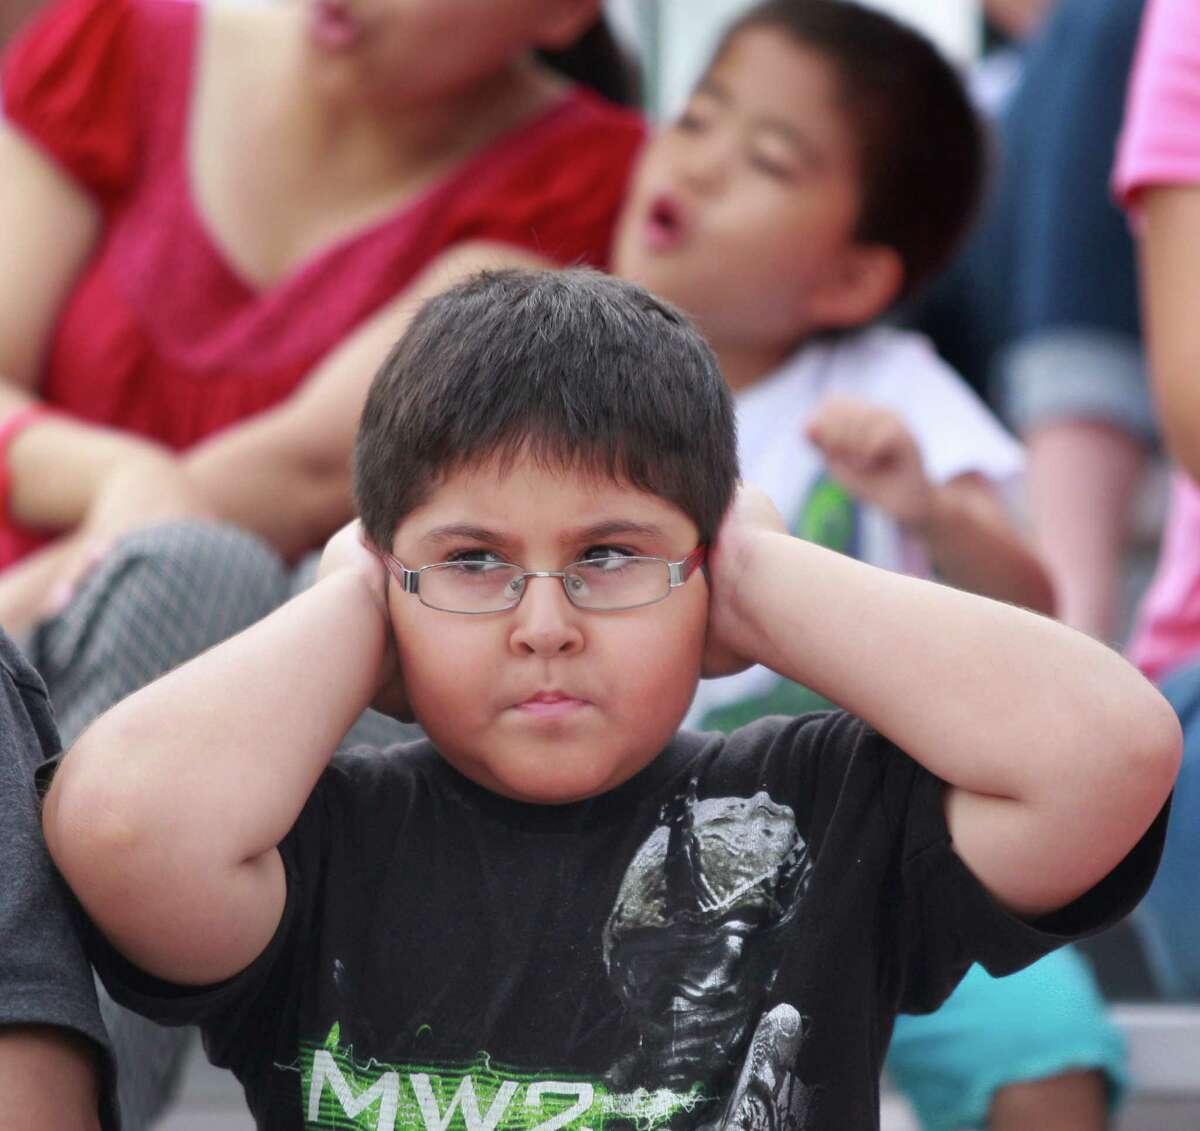 Fabian Arellano of Houston covers his ears while watching the IndyCar Series Race #1 at the Grand Prix of Houston at NRG Park in 2014.